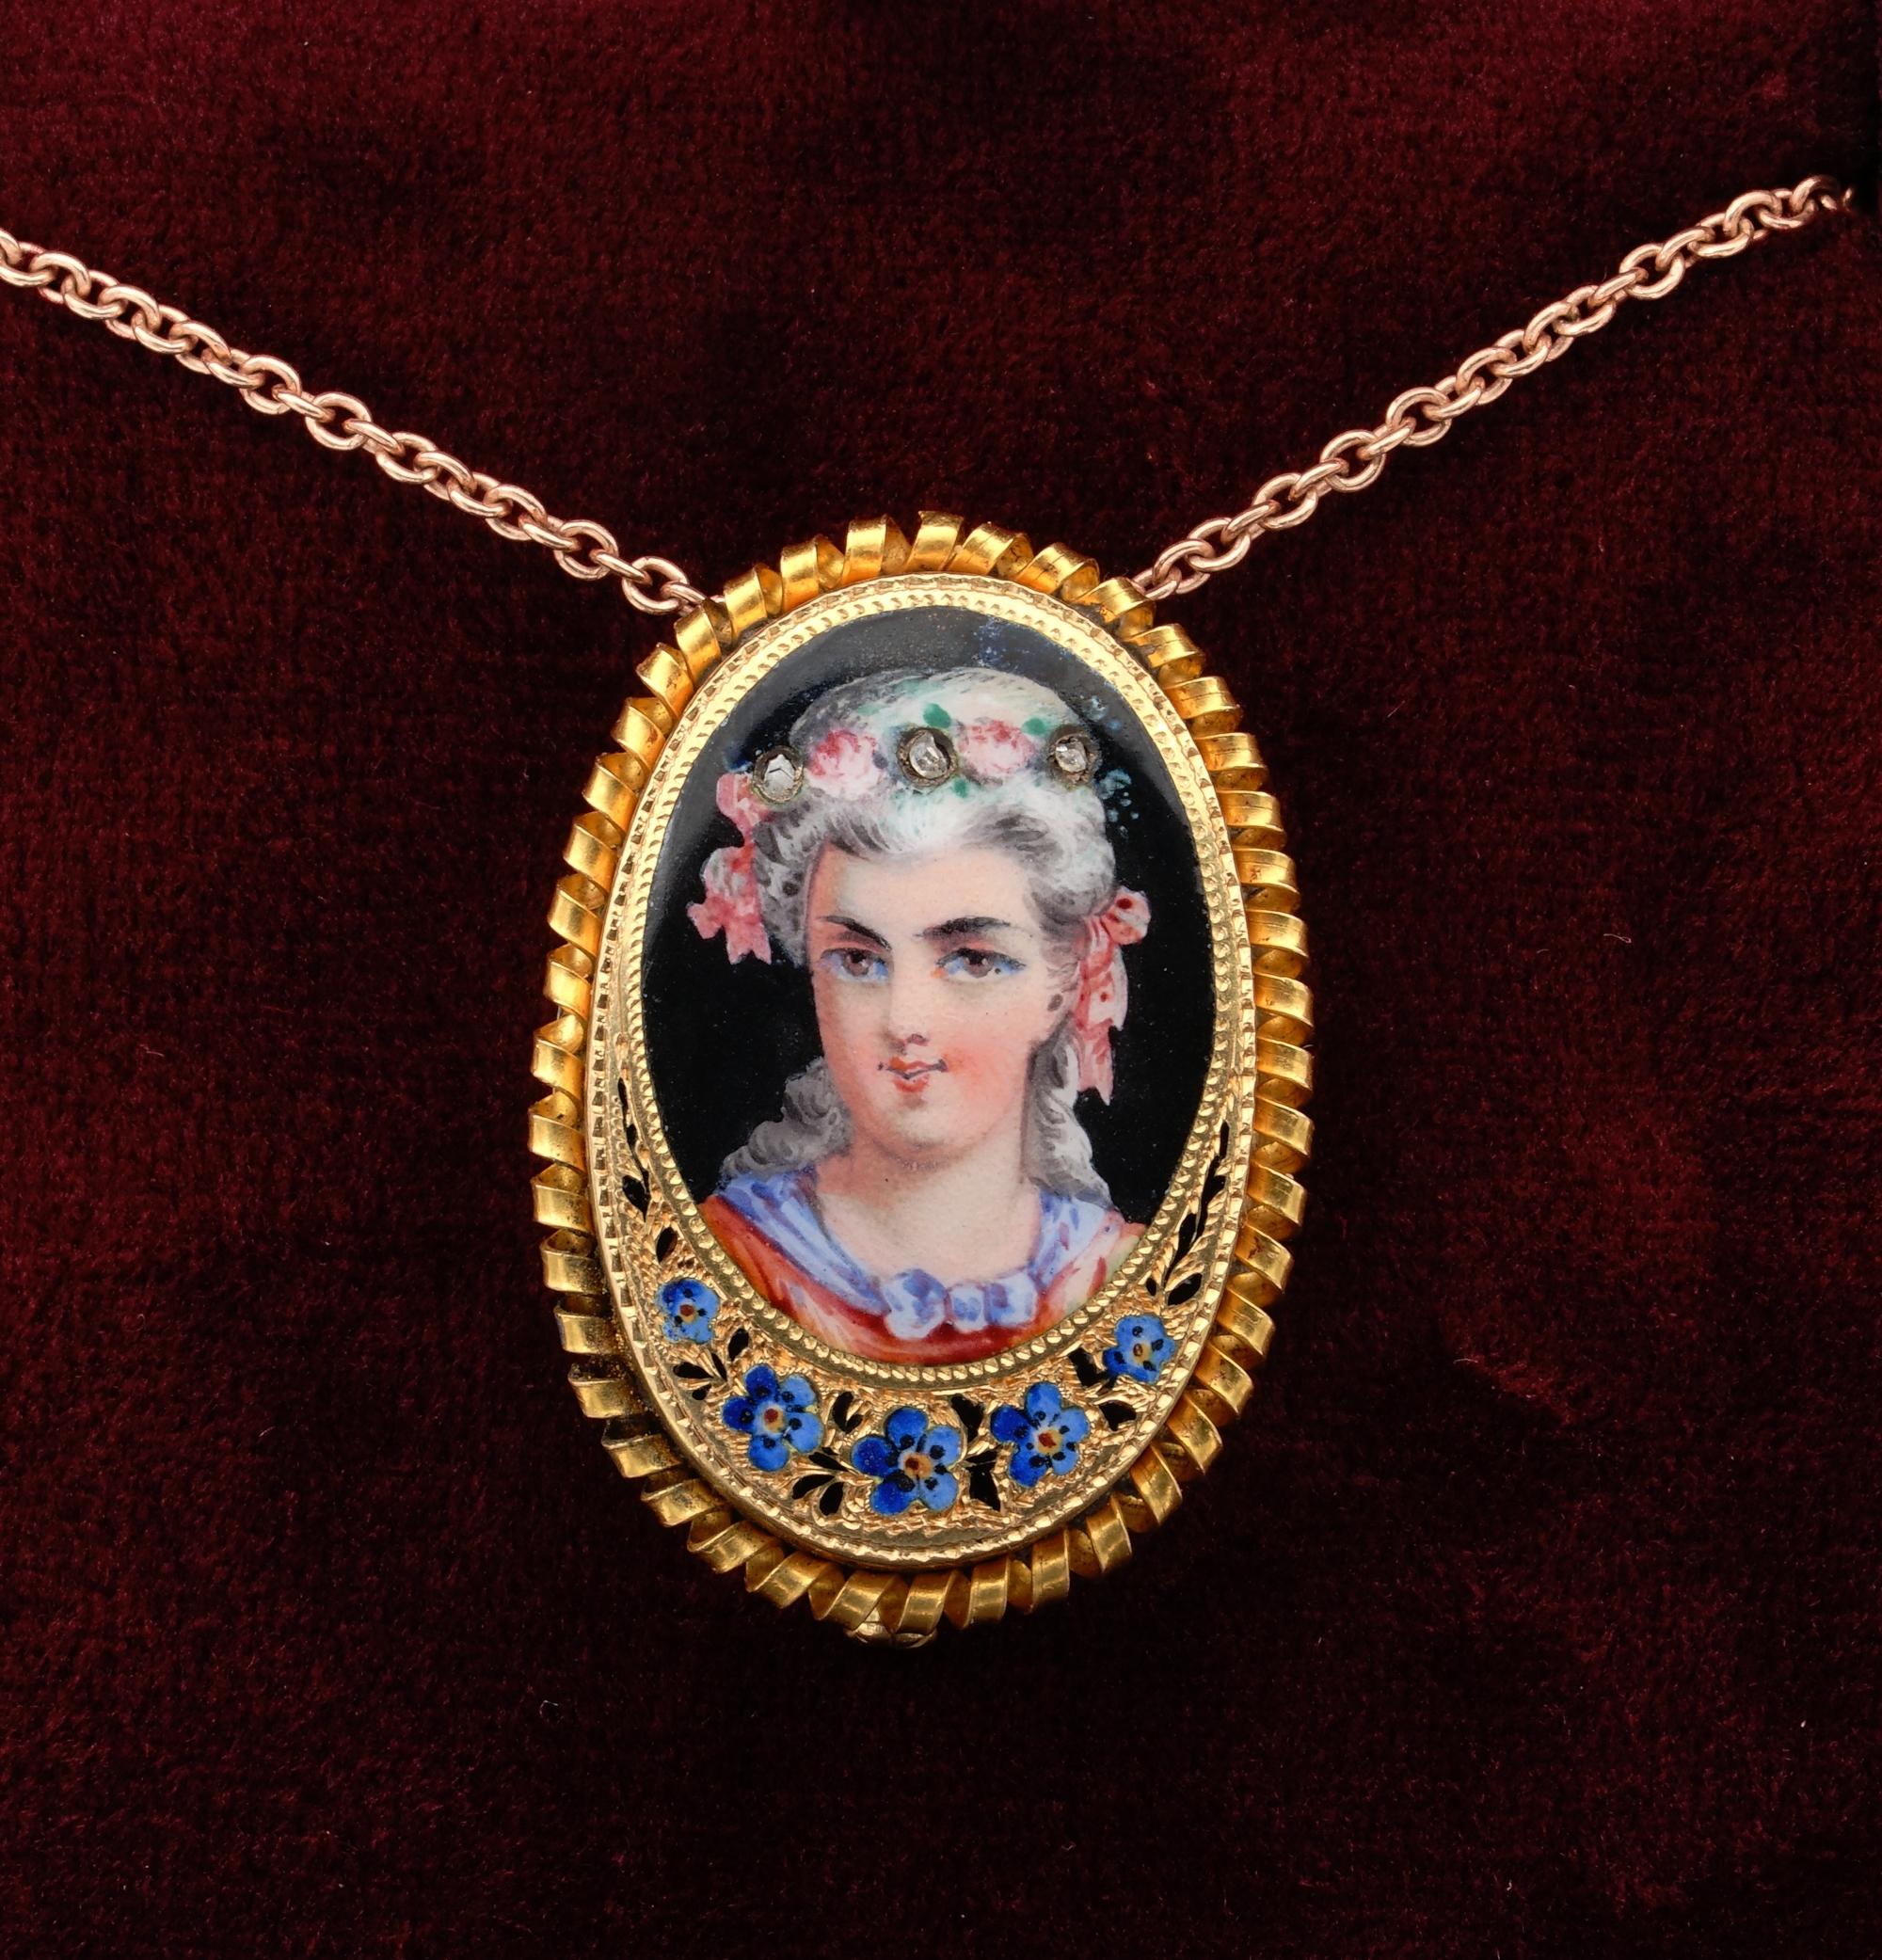 Sensing Past Art

This antique 19th Century painted Enamel Miniature depicts a charming young lady portrait
Beautifully represented with graceful look in elegant outfit of the time, adorned with bows and flowers with rose cut Diamond accent set into